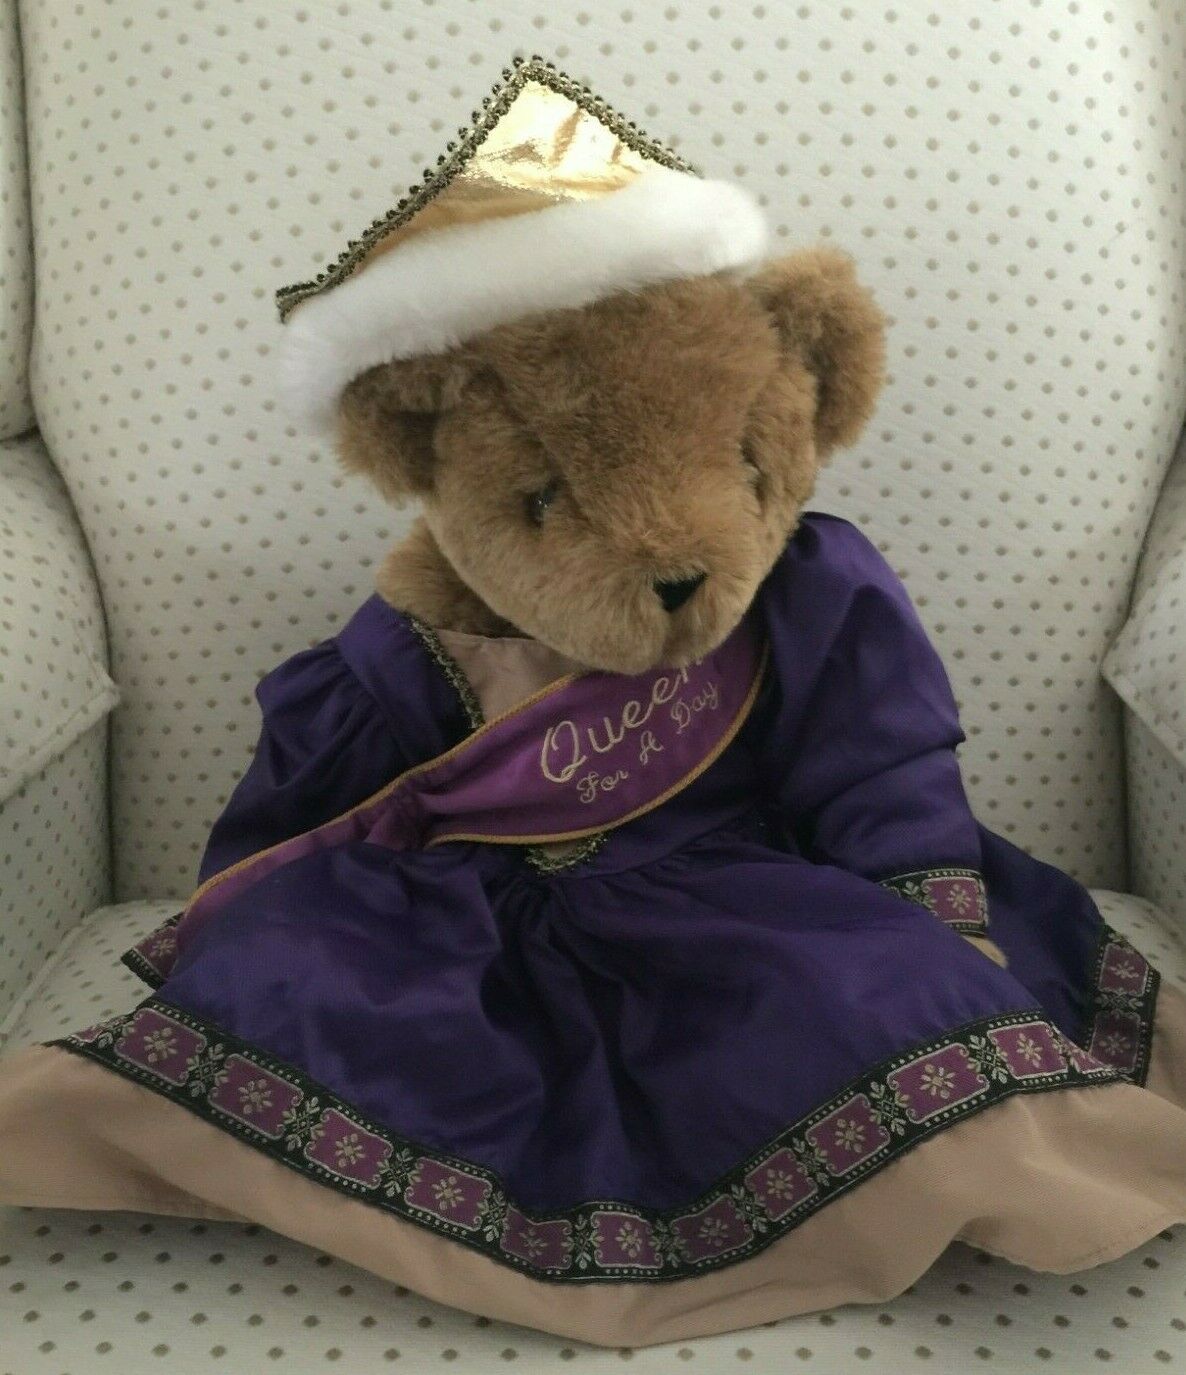 Vermont Teddy Bear Company QUEEN FOR A DAY - Grt Birthday / Congratulations Gift